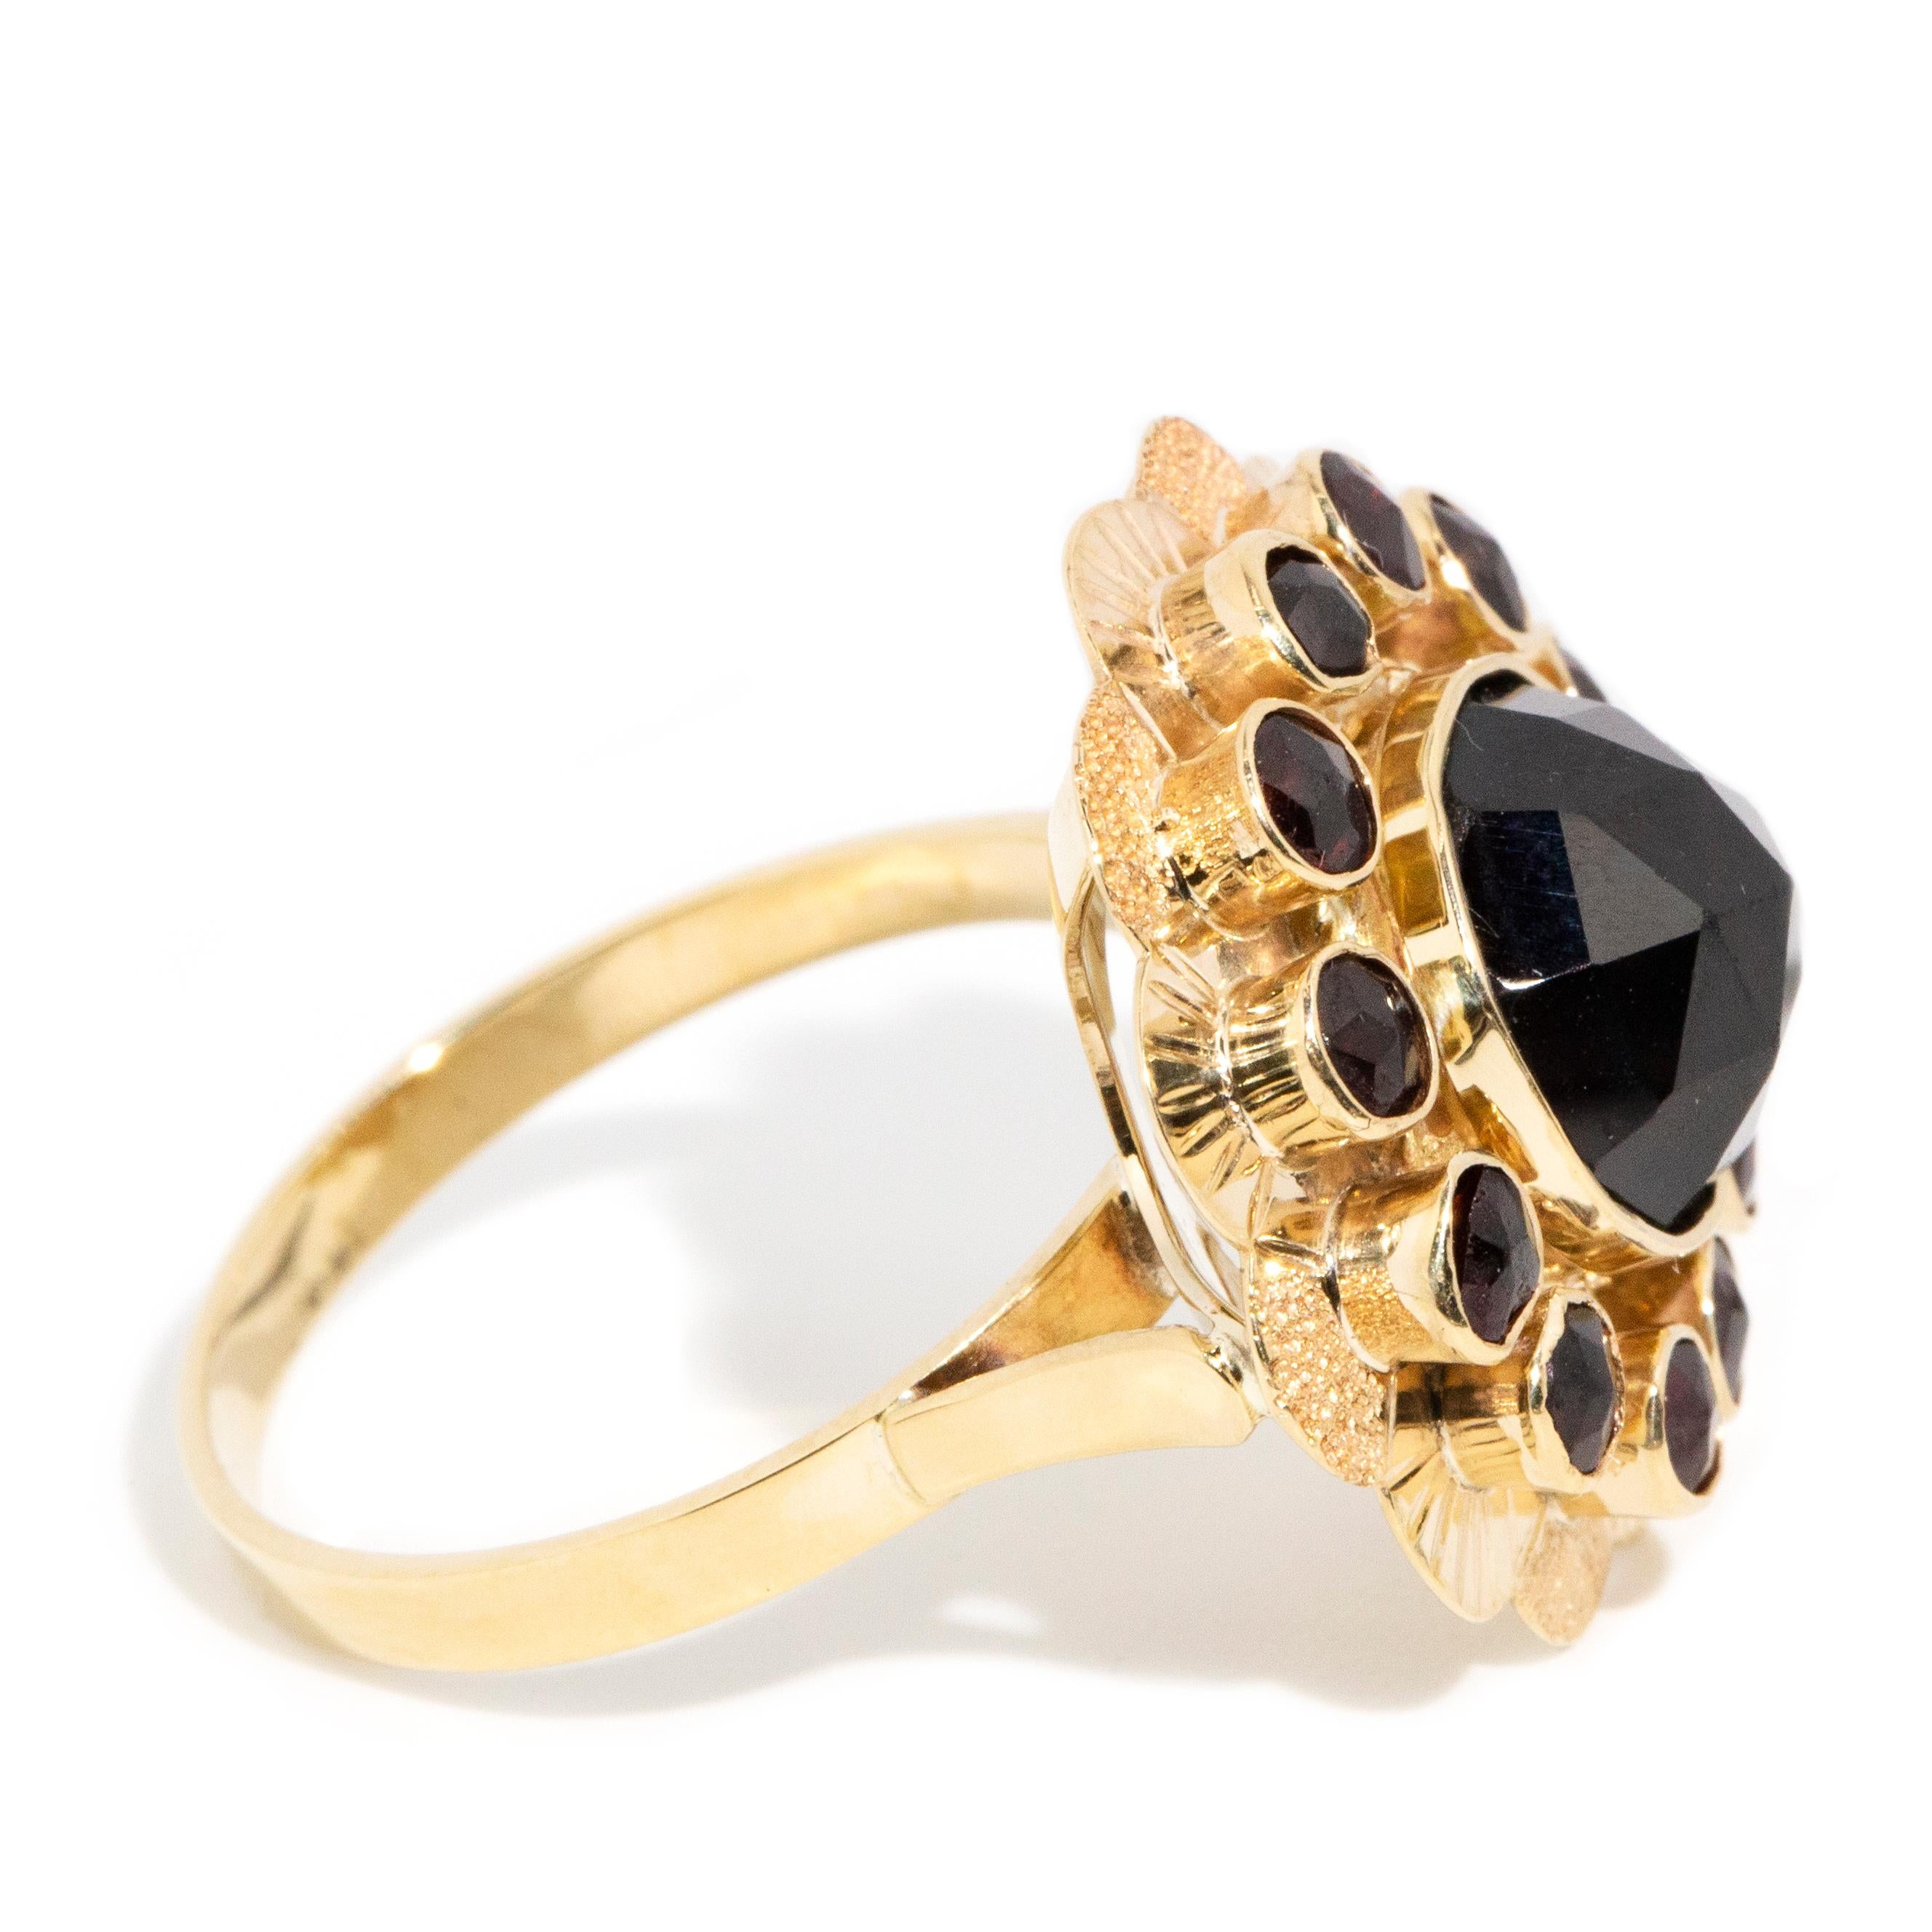 Vintage Circa 1980s Bohemian Garnet Starburst Cluster Ring 14 Carat Yellow Gold In Good Condition For Sale In Hamilton, AU